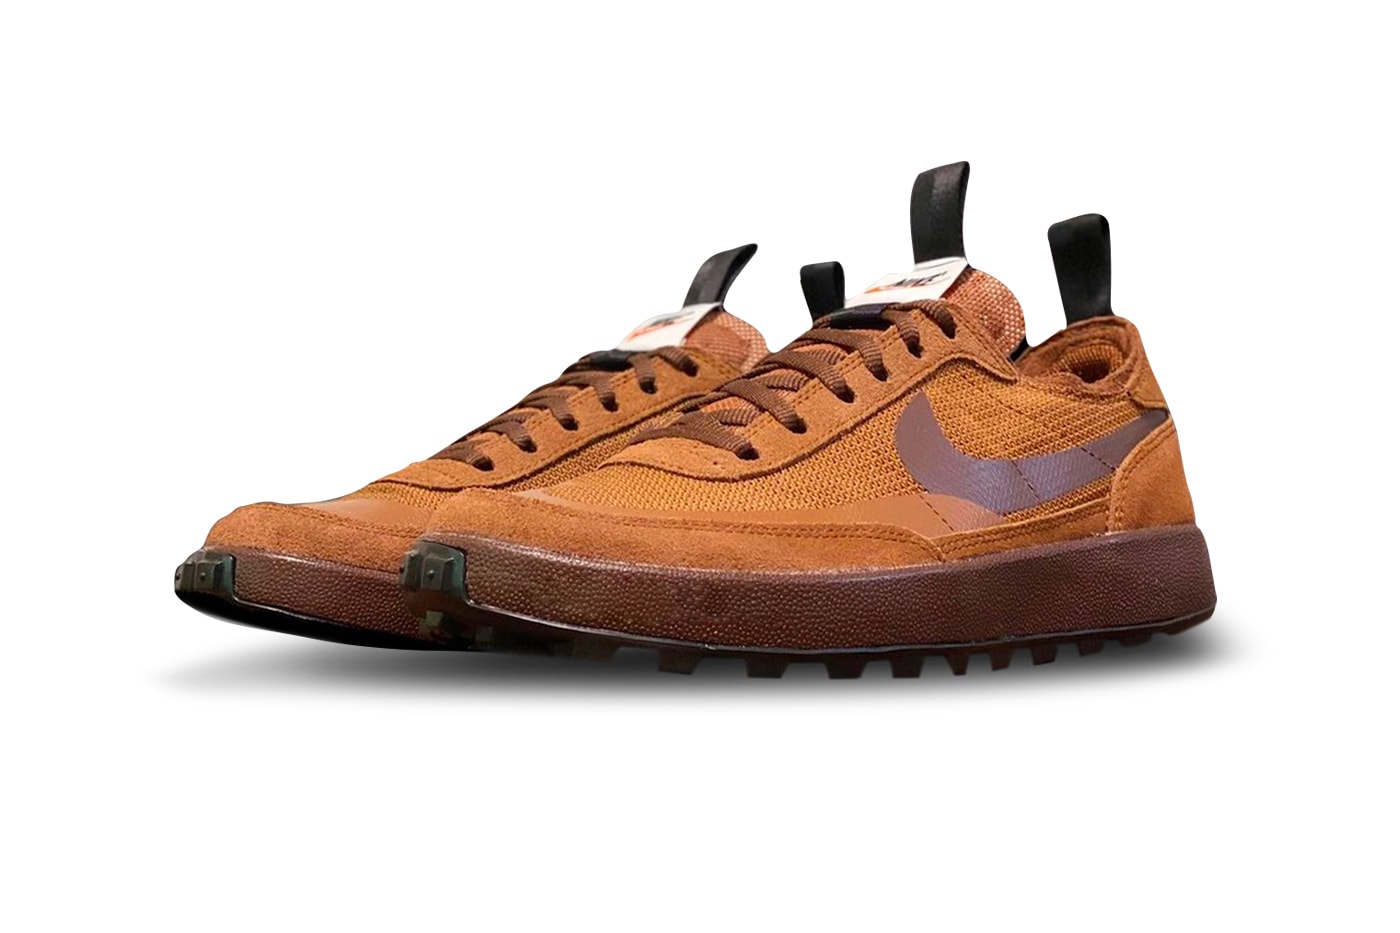 DID WE NEED THIS COLORWAY? - TOM SACHS NIKECRAFT GENERAL PURPOSE SHOE FIELD  BROWN REVIEW & ON FEET 